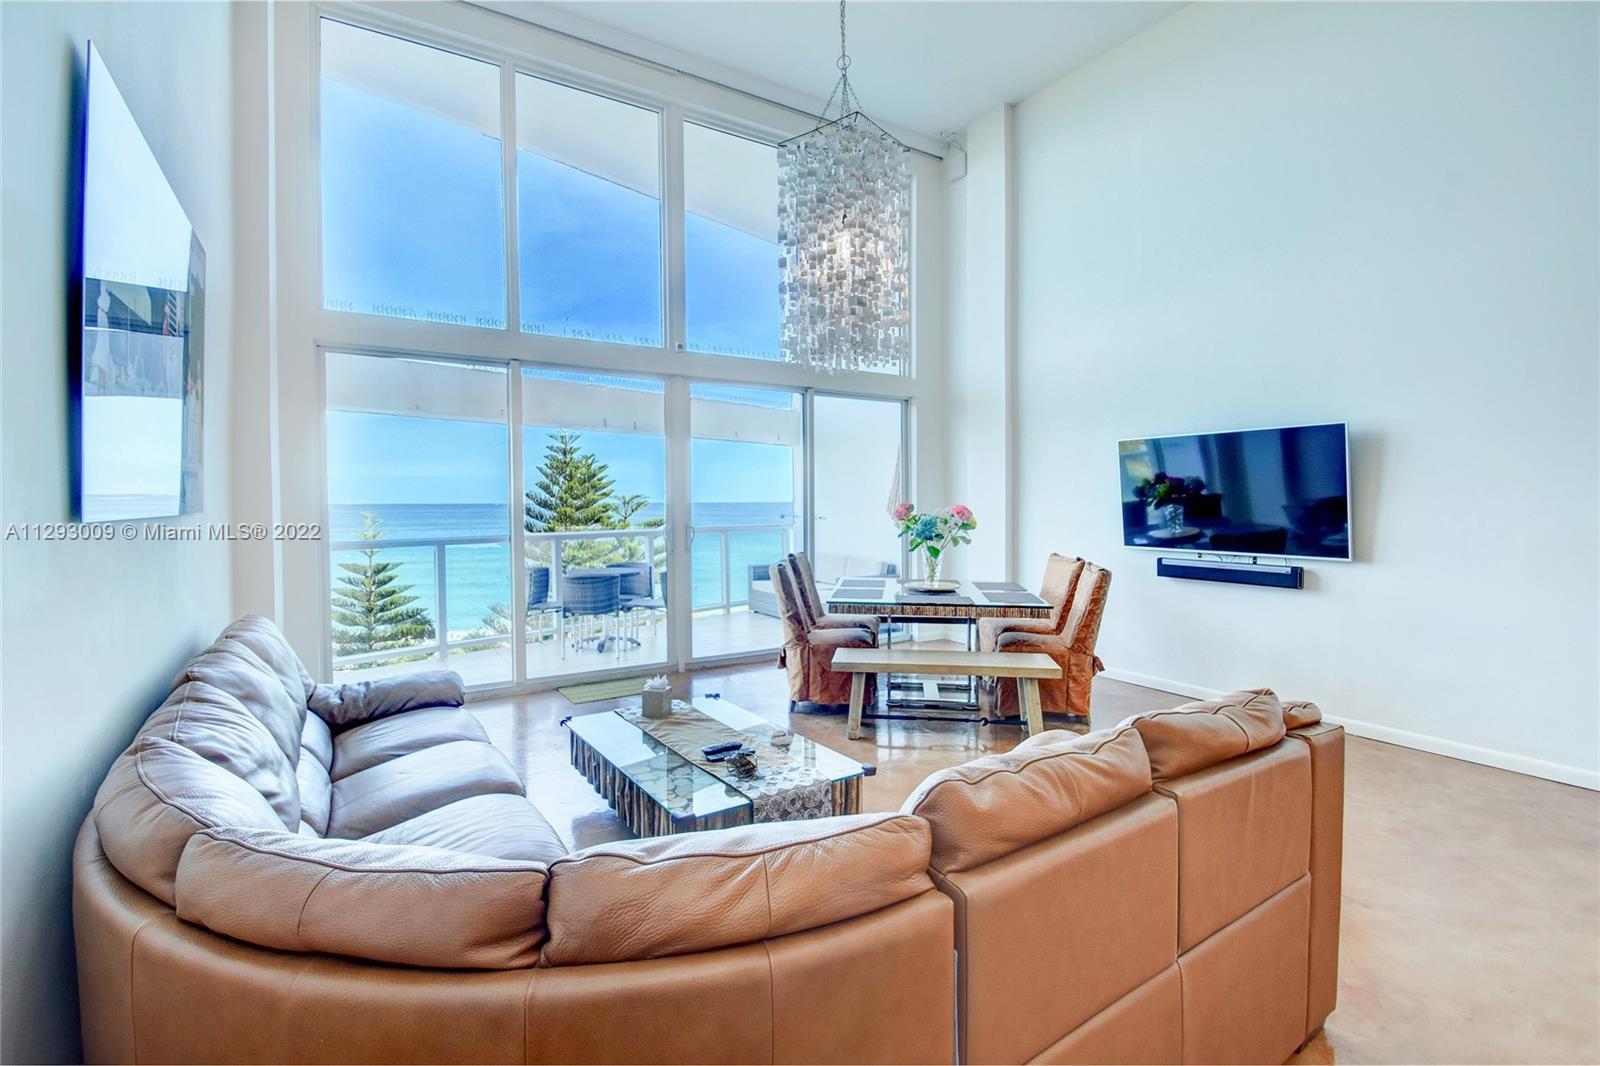 This gorgeous two-story oceanfront condo is the perfect income producing property. No rental restric